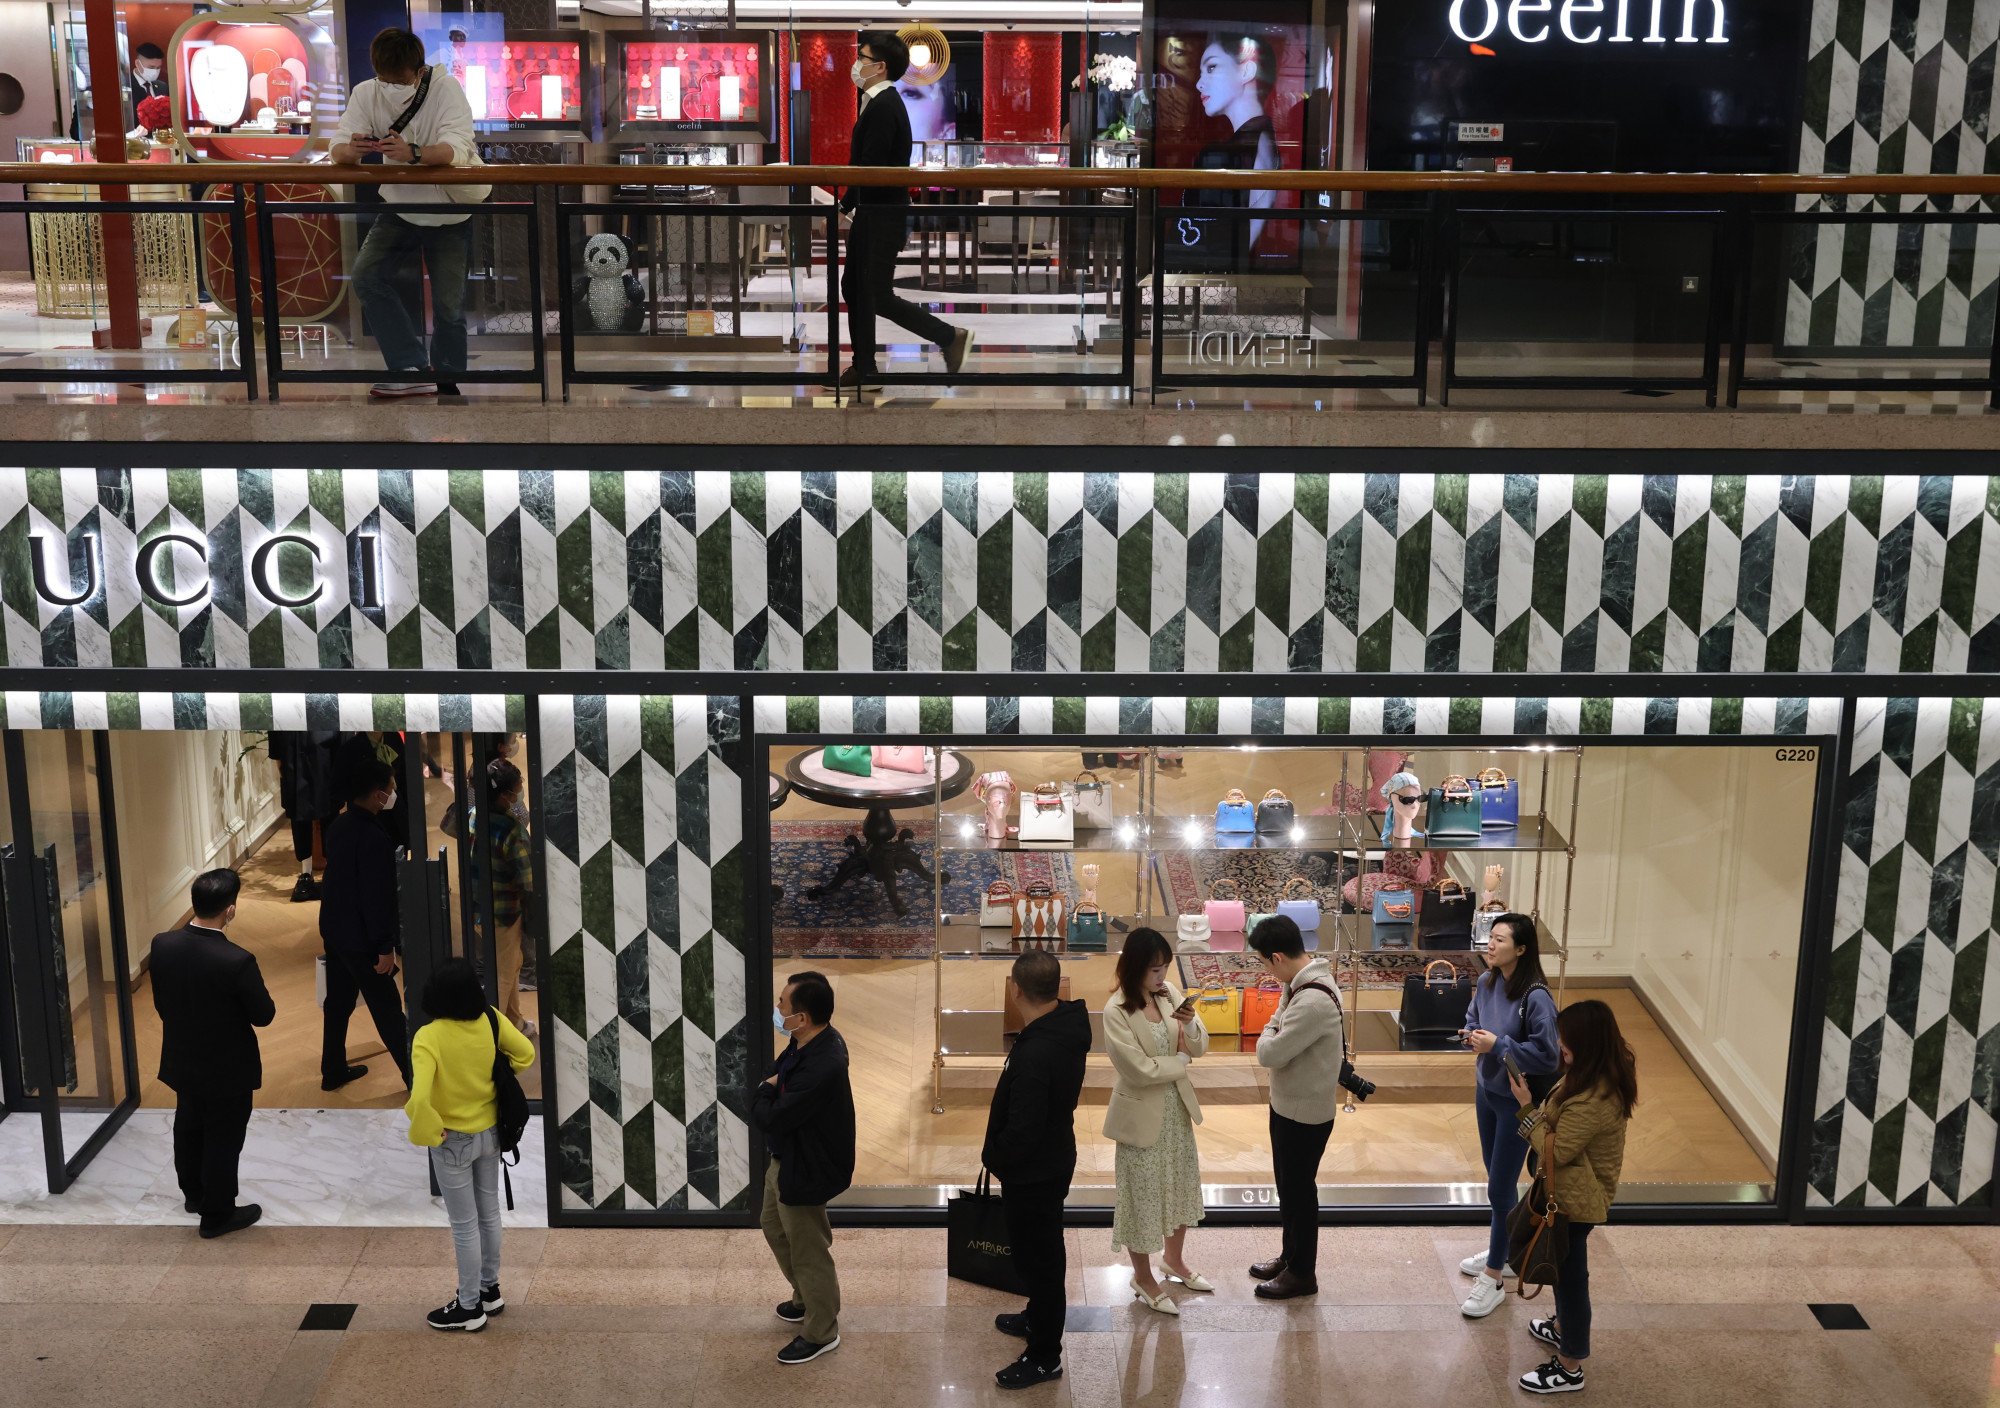 hong kong’s once-vibrant retail sector faces perilous times